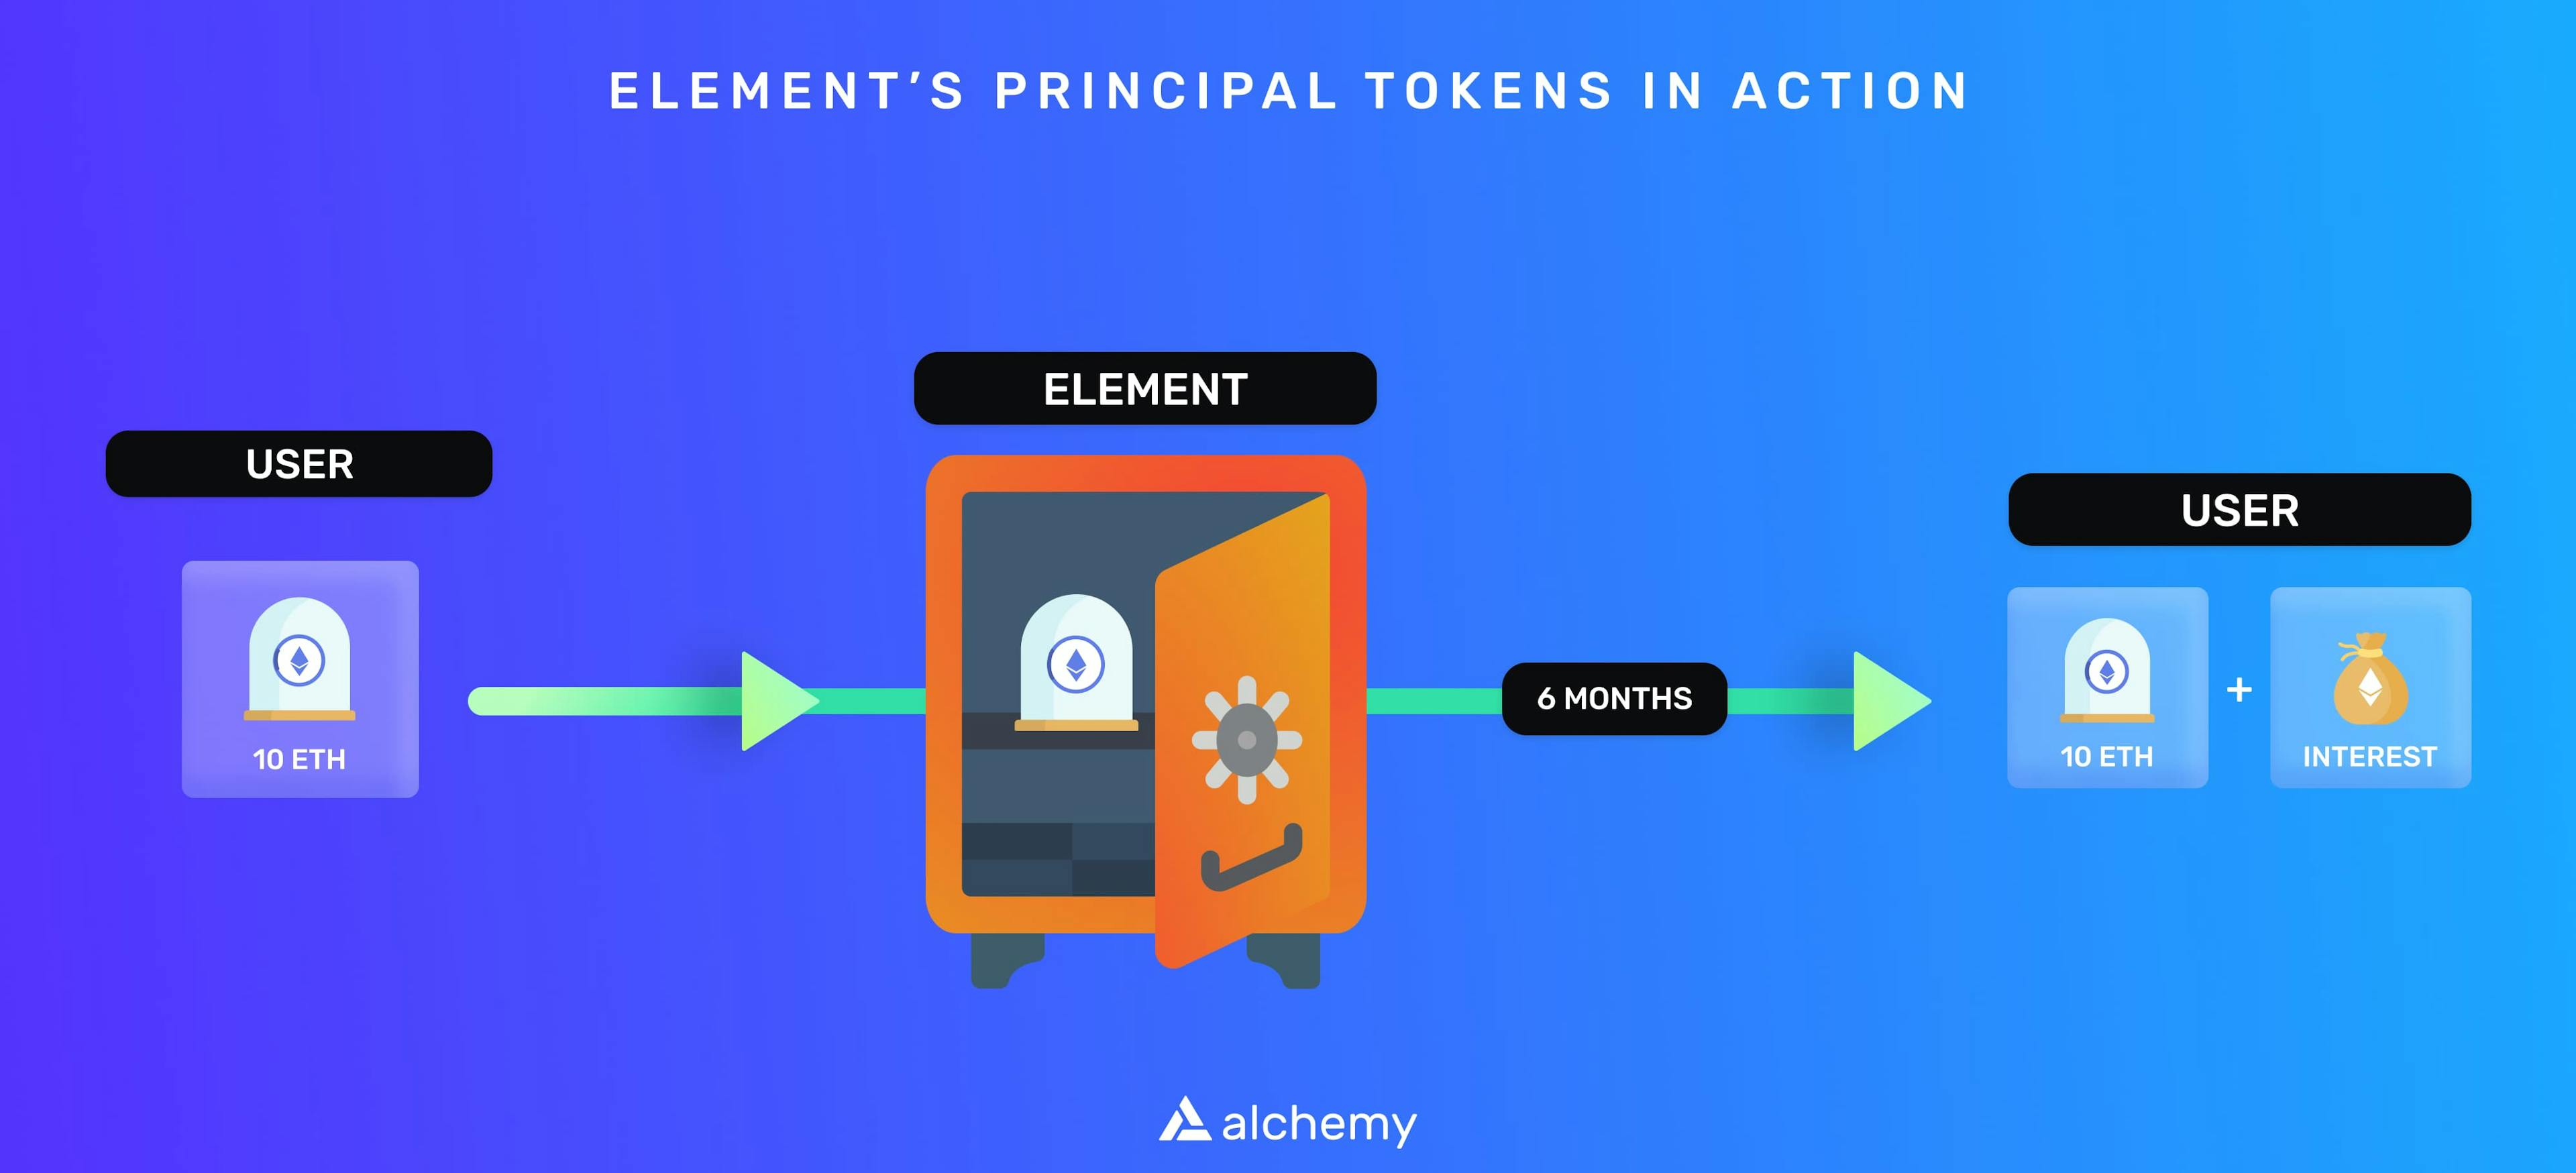 An example of how Element’s Principal Tokens work